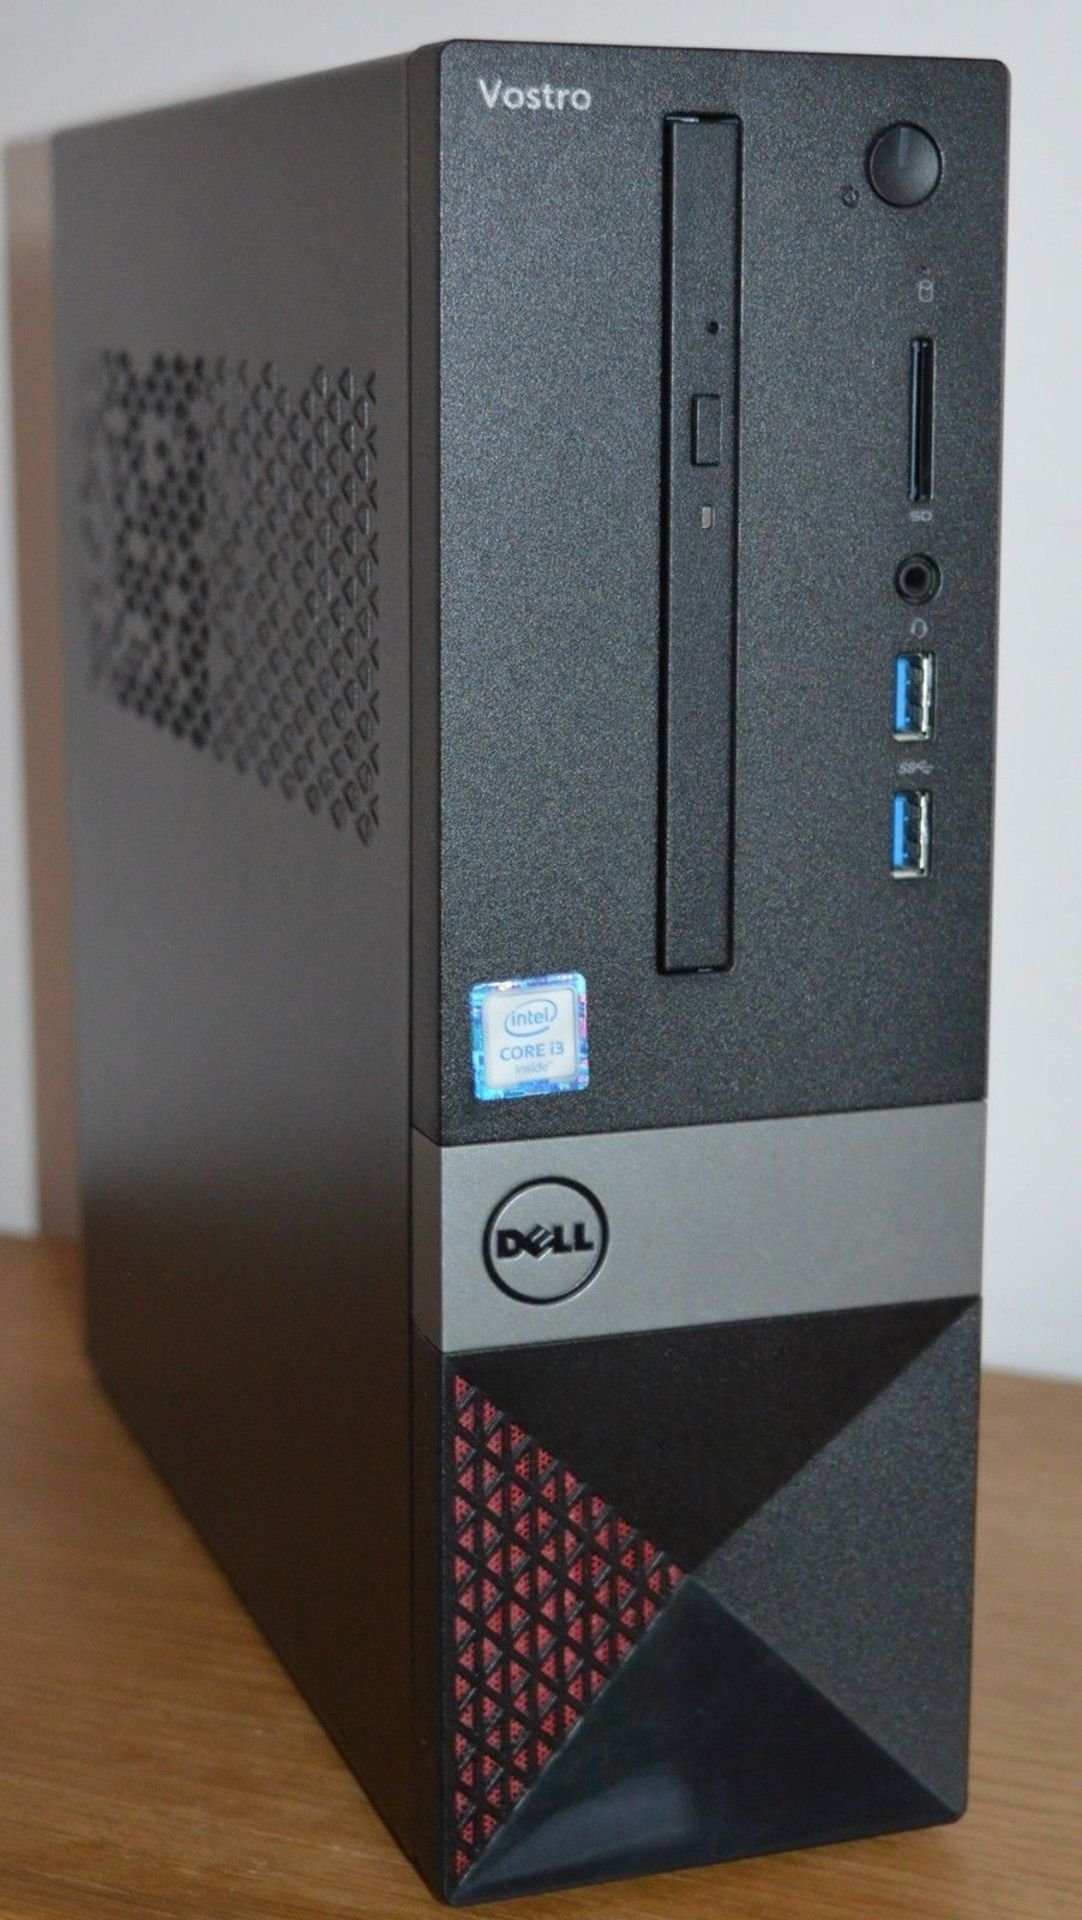 1 x Dell Vostro 3250 Small Form Factor PC - Features Intel Skylake G4400 3.4ghz Processor, 8gb - Image 4 of 5